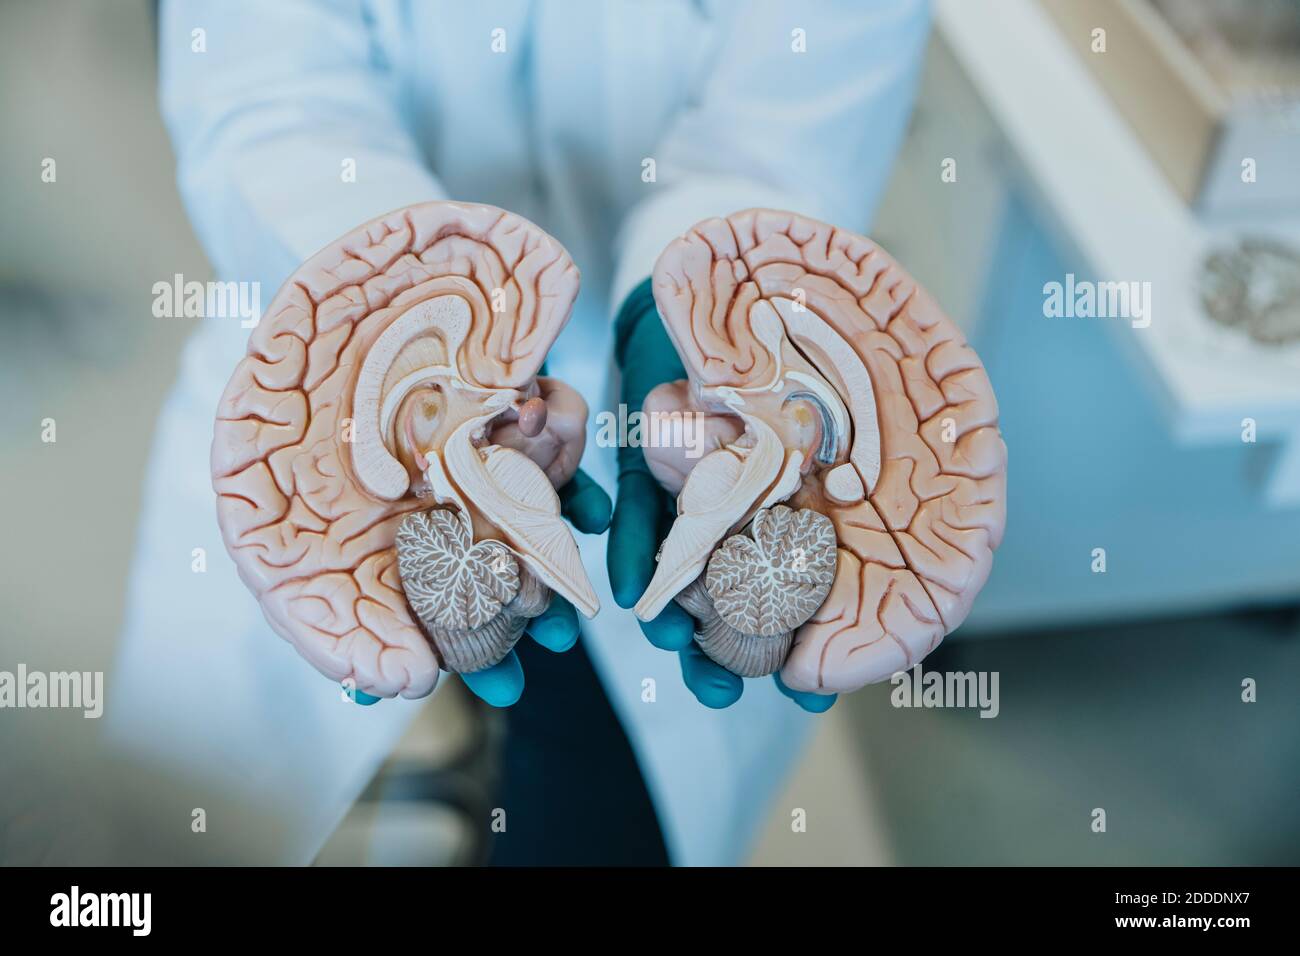 Scientist showing halves of artificial human brain part while standing at laboratory Stock Photo